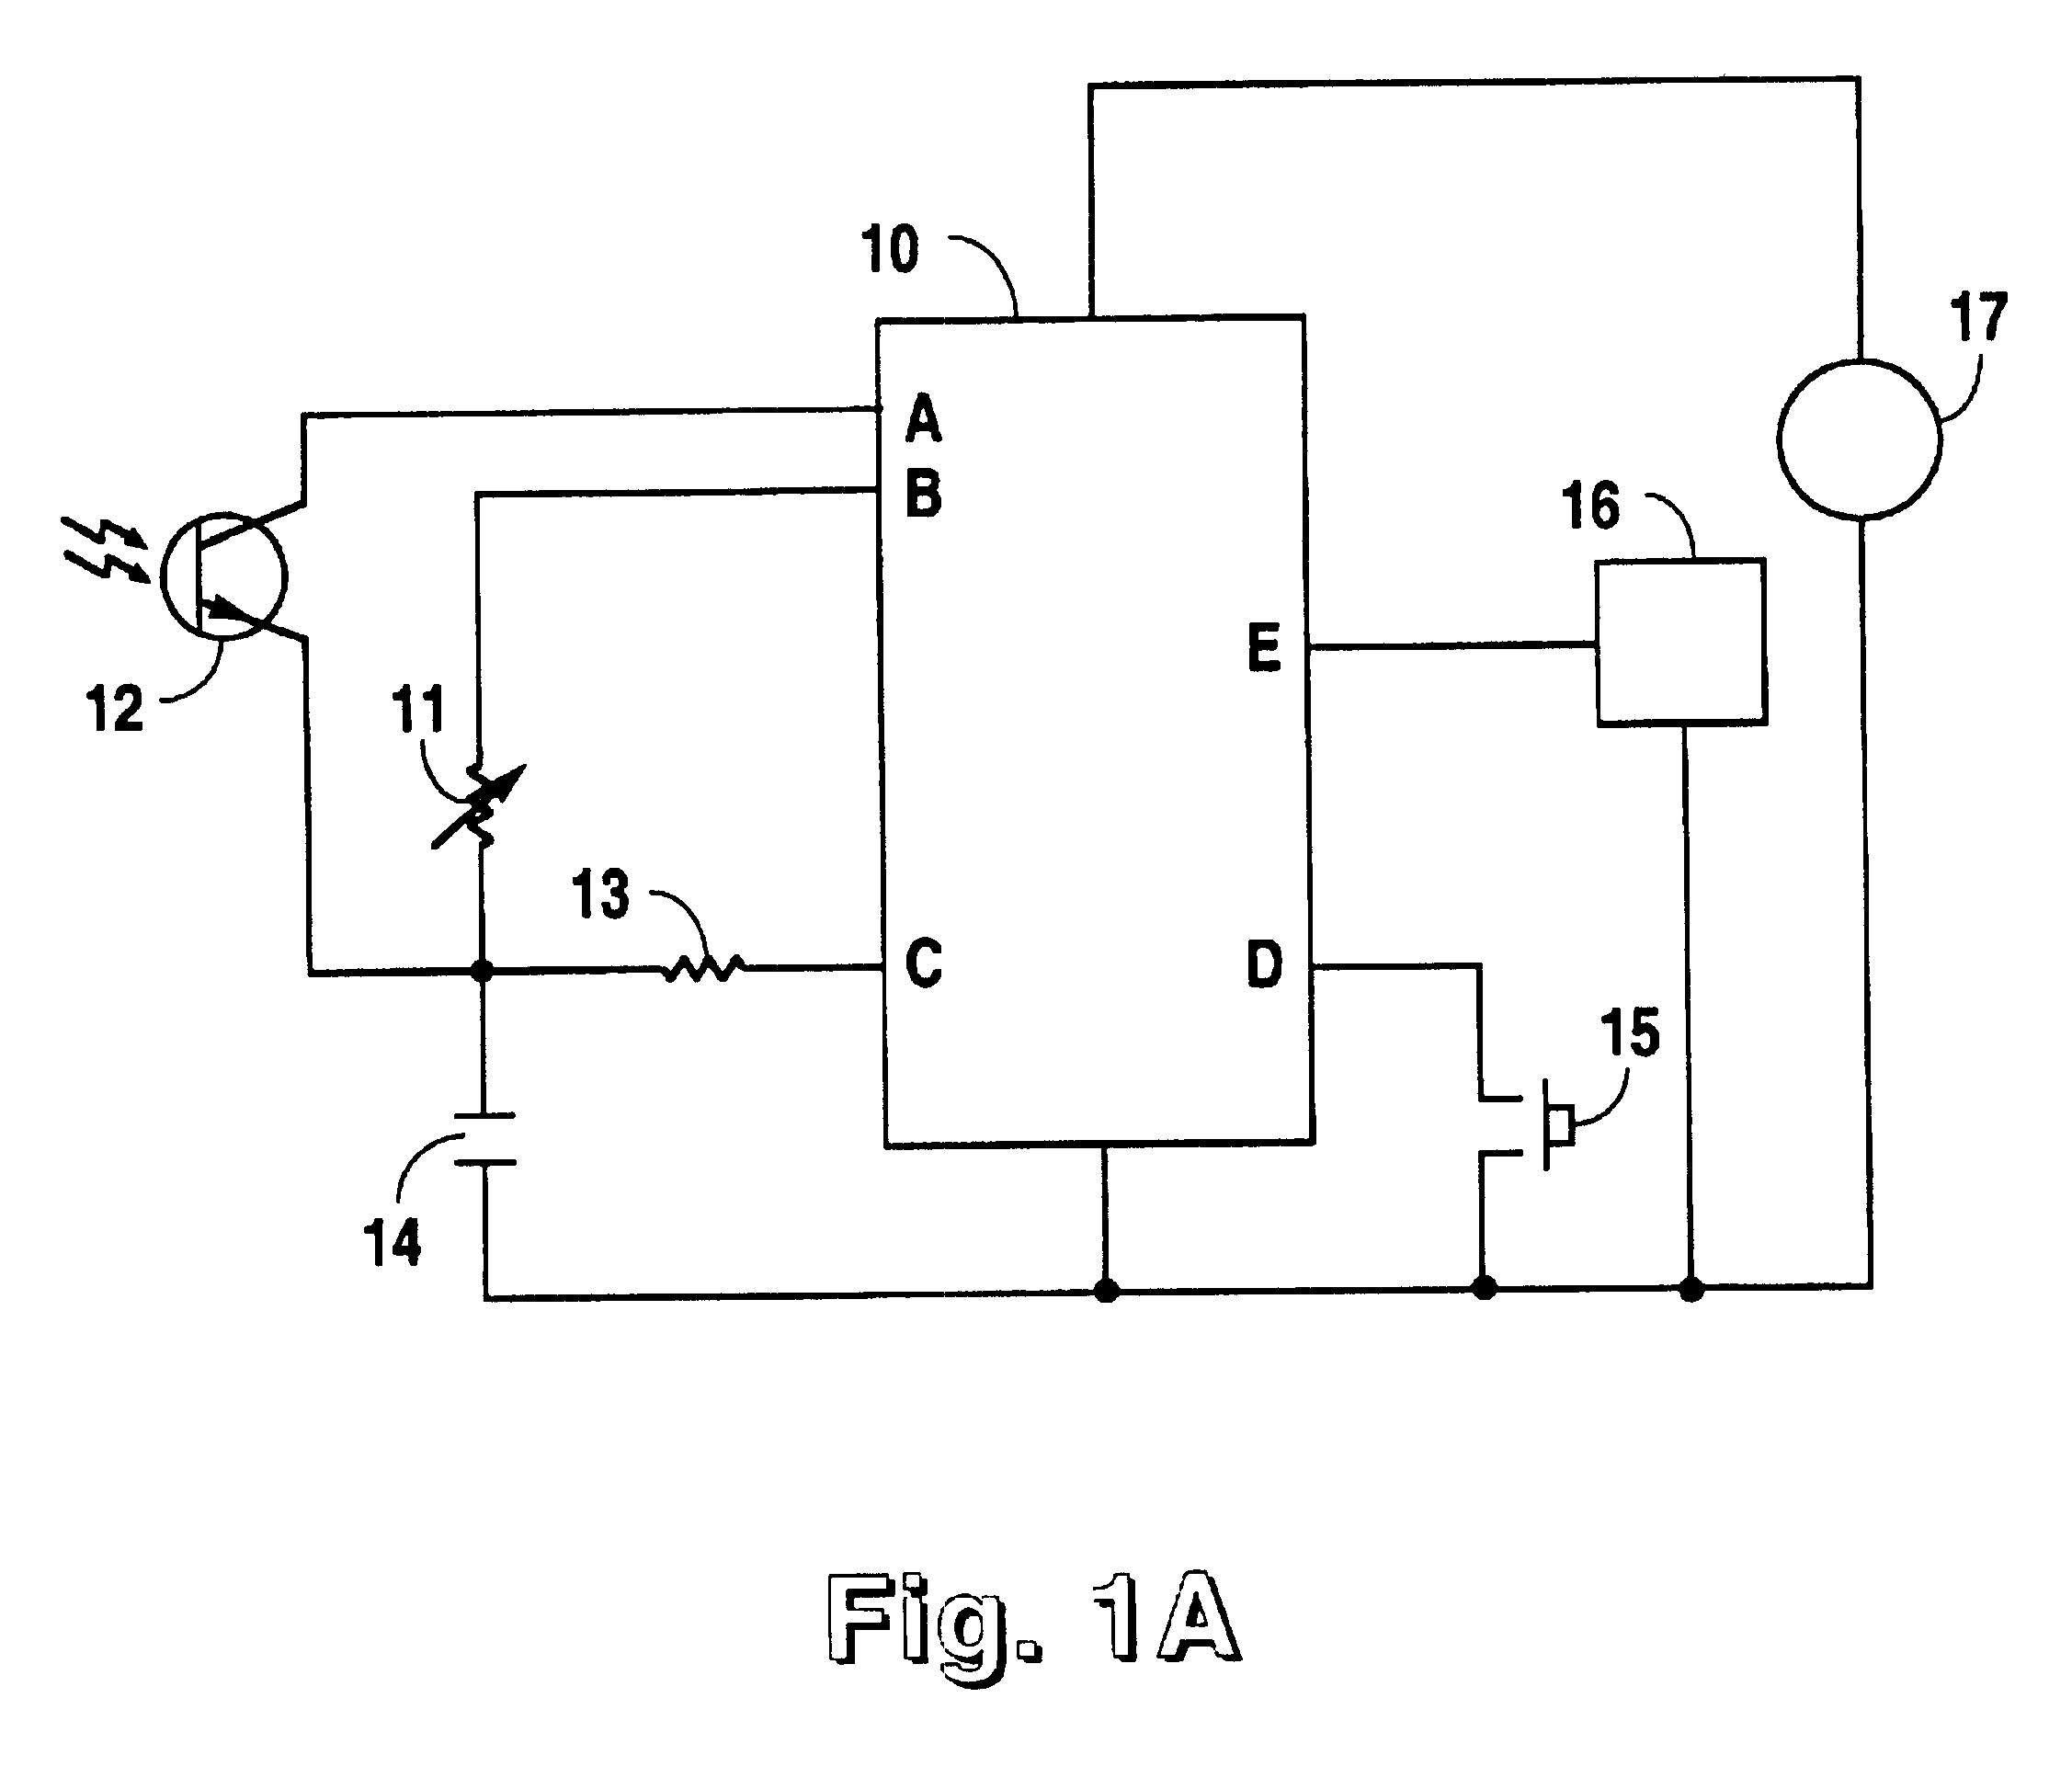 Electronic controller for scheduling device activation by sensing daylight